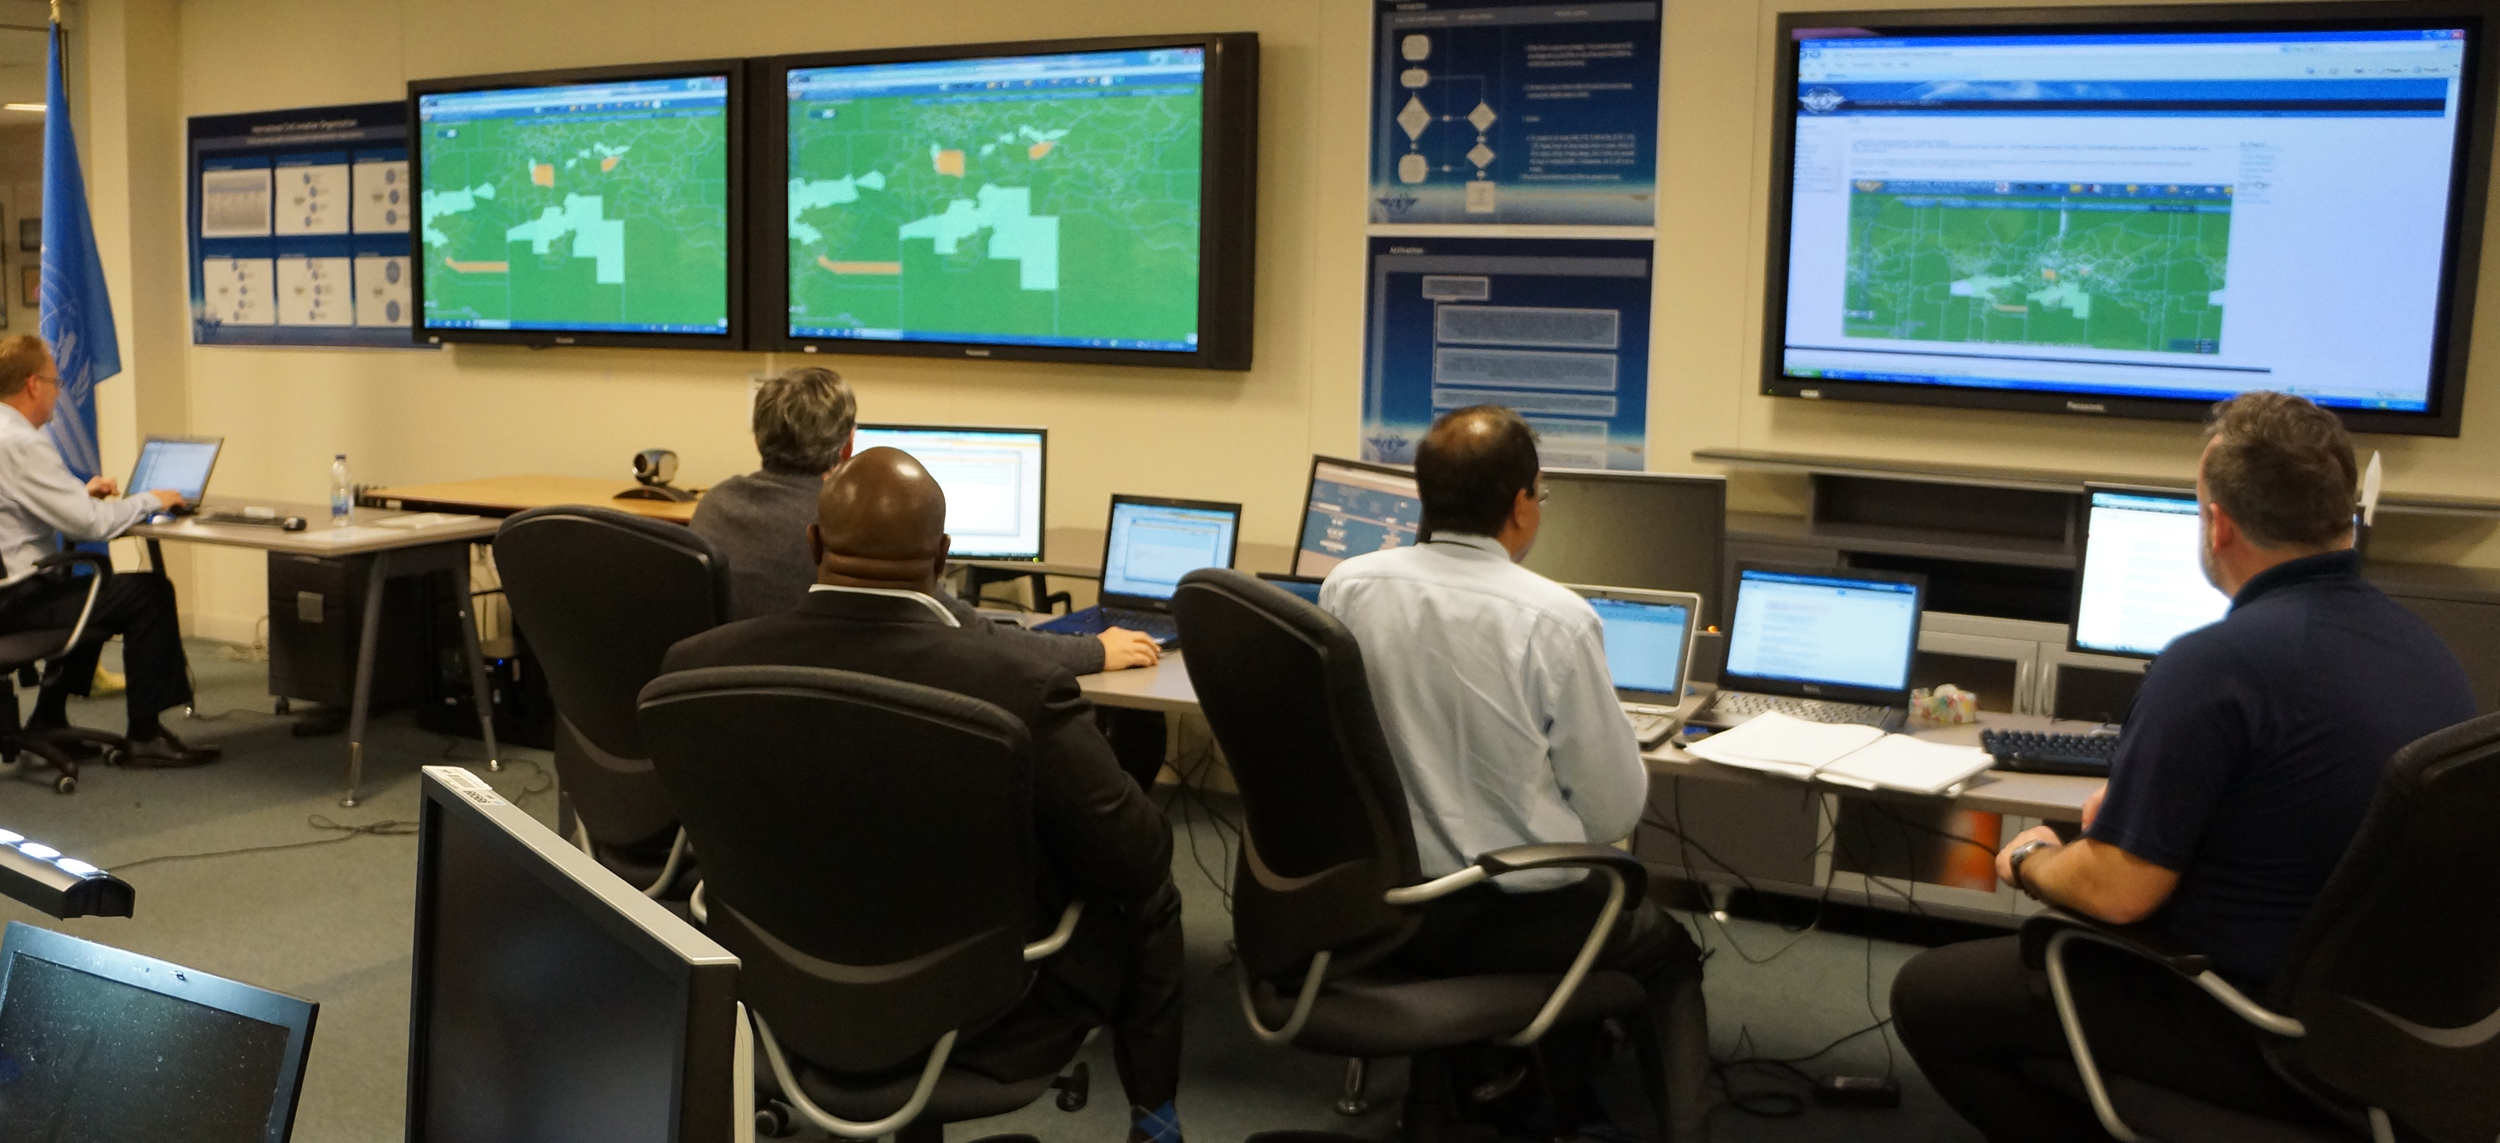 ICAO, IATA and CANSO air navigation specialists overseeing the transition to the new aviation system flight plan in the ICAO Command Centre at the UN specialized agency’s Montreal headquarters.